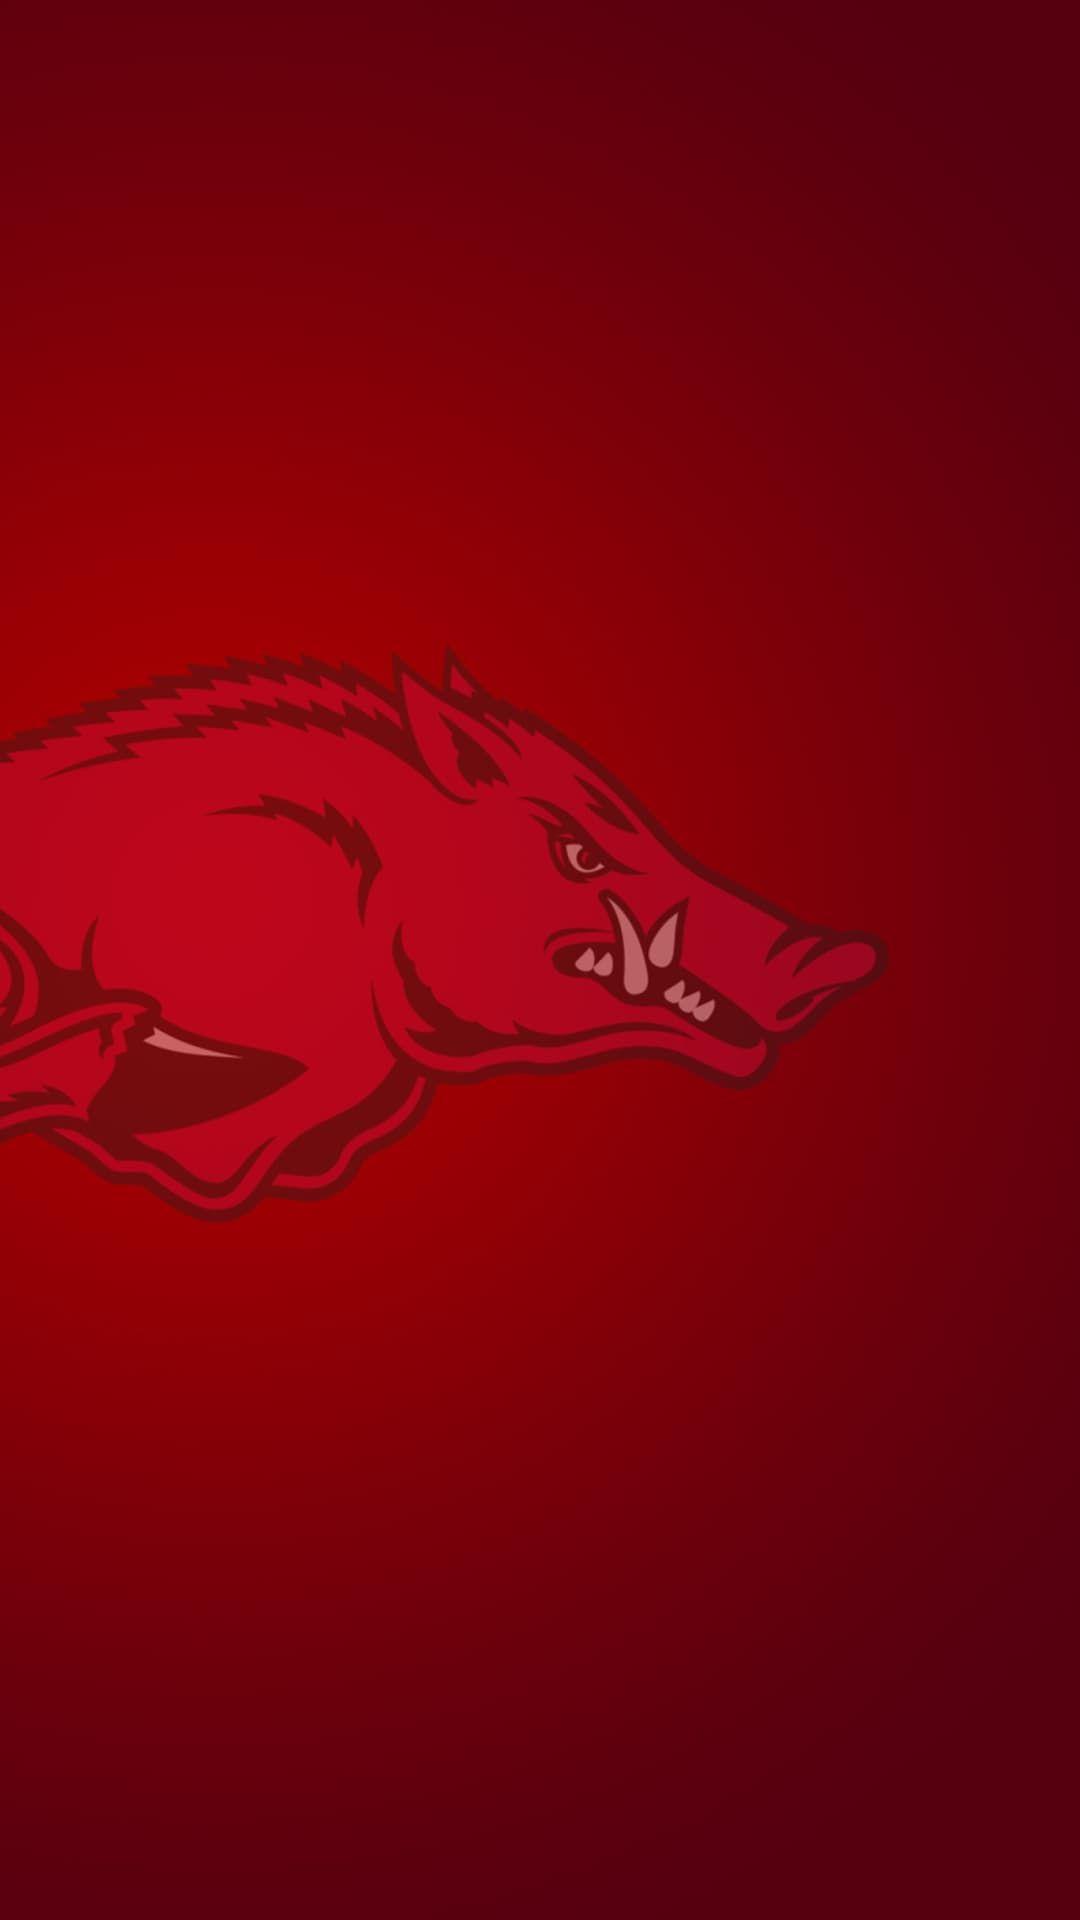 Get a Set of 12 Officially NCAA Licensed Arkansas Razorbacks iPhone  Wallpapers sized precisely for any model of iPhone with your Teams Exact  Digital Logo and T